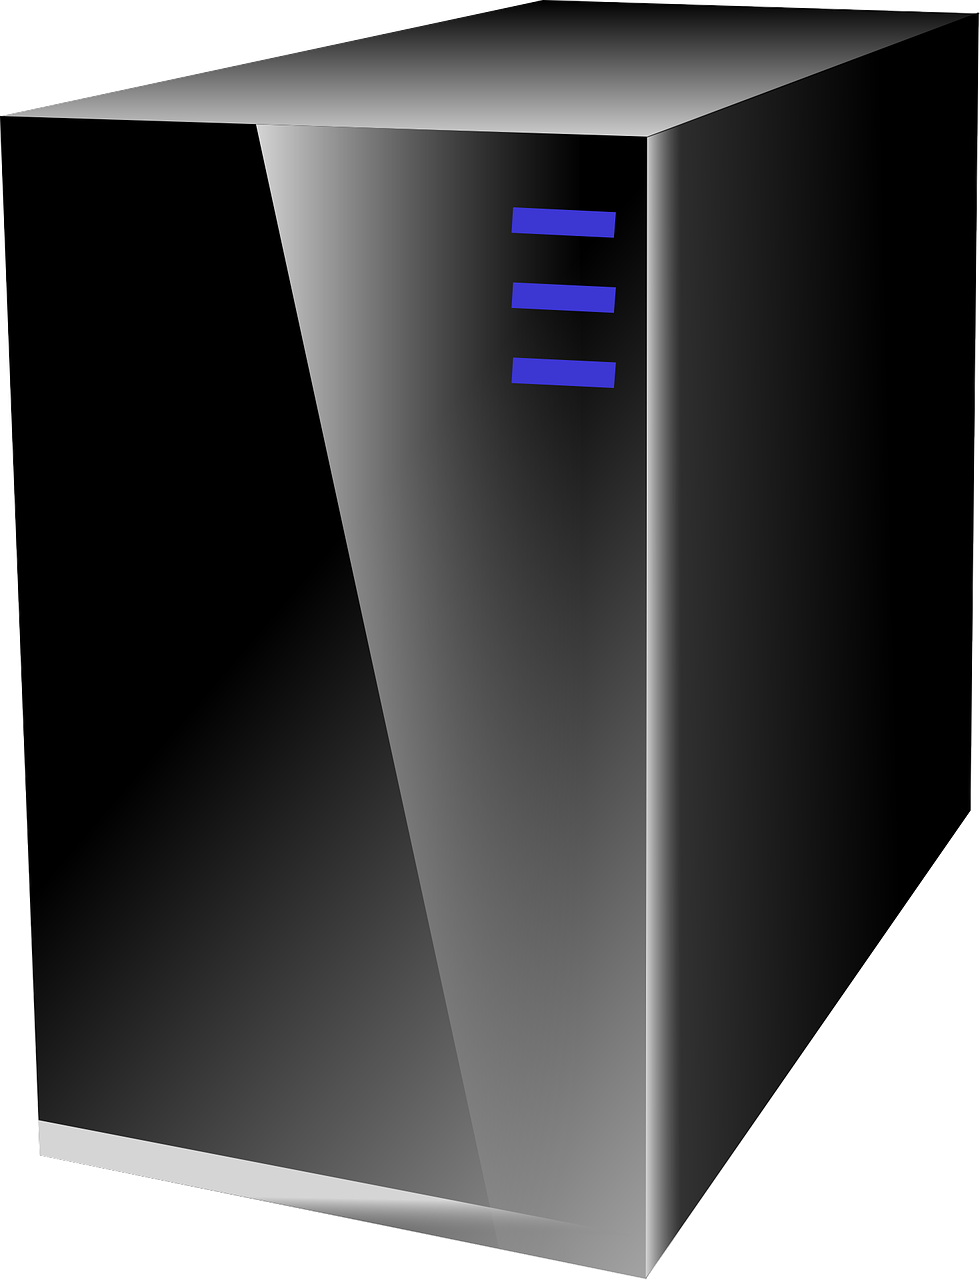 a black box with a blue stripe on it, a computer rendering, pixabay, computer art, the console is tall and imposing, glass cover, crystal column, liquid cooling